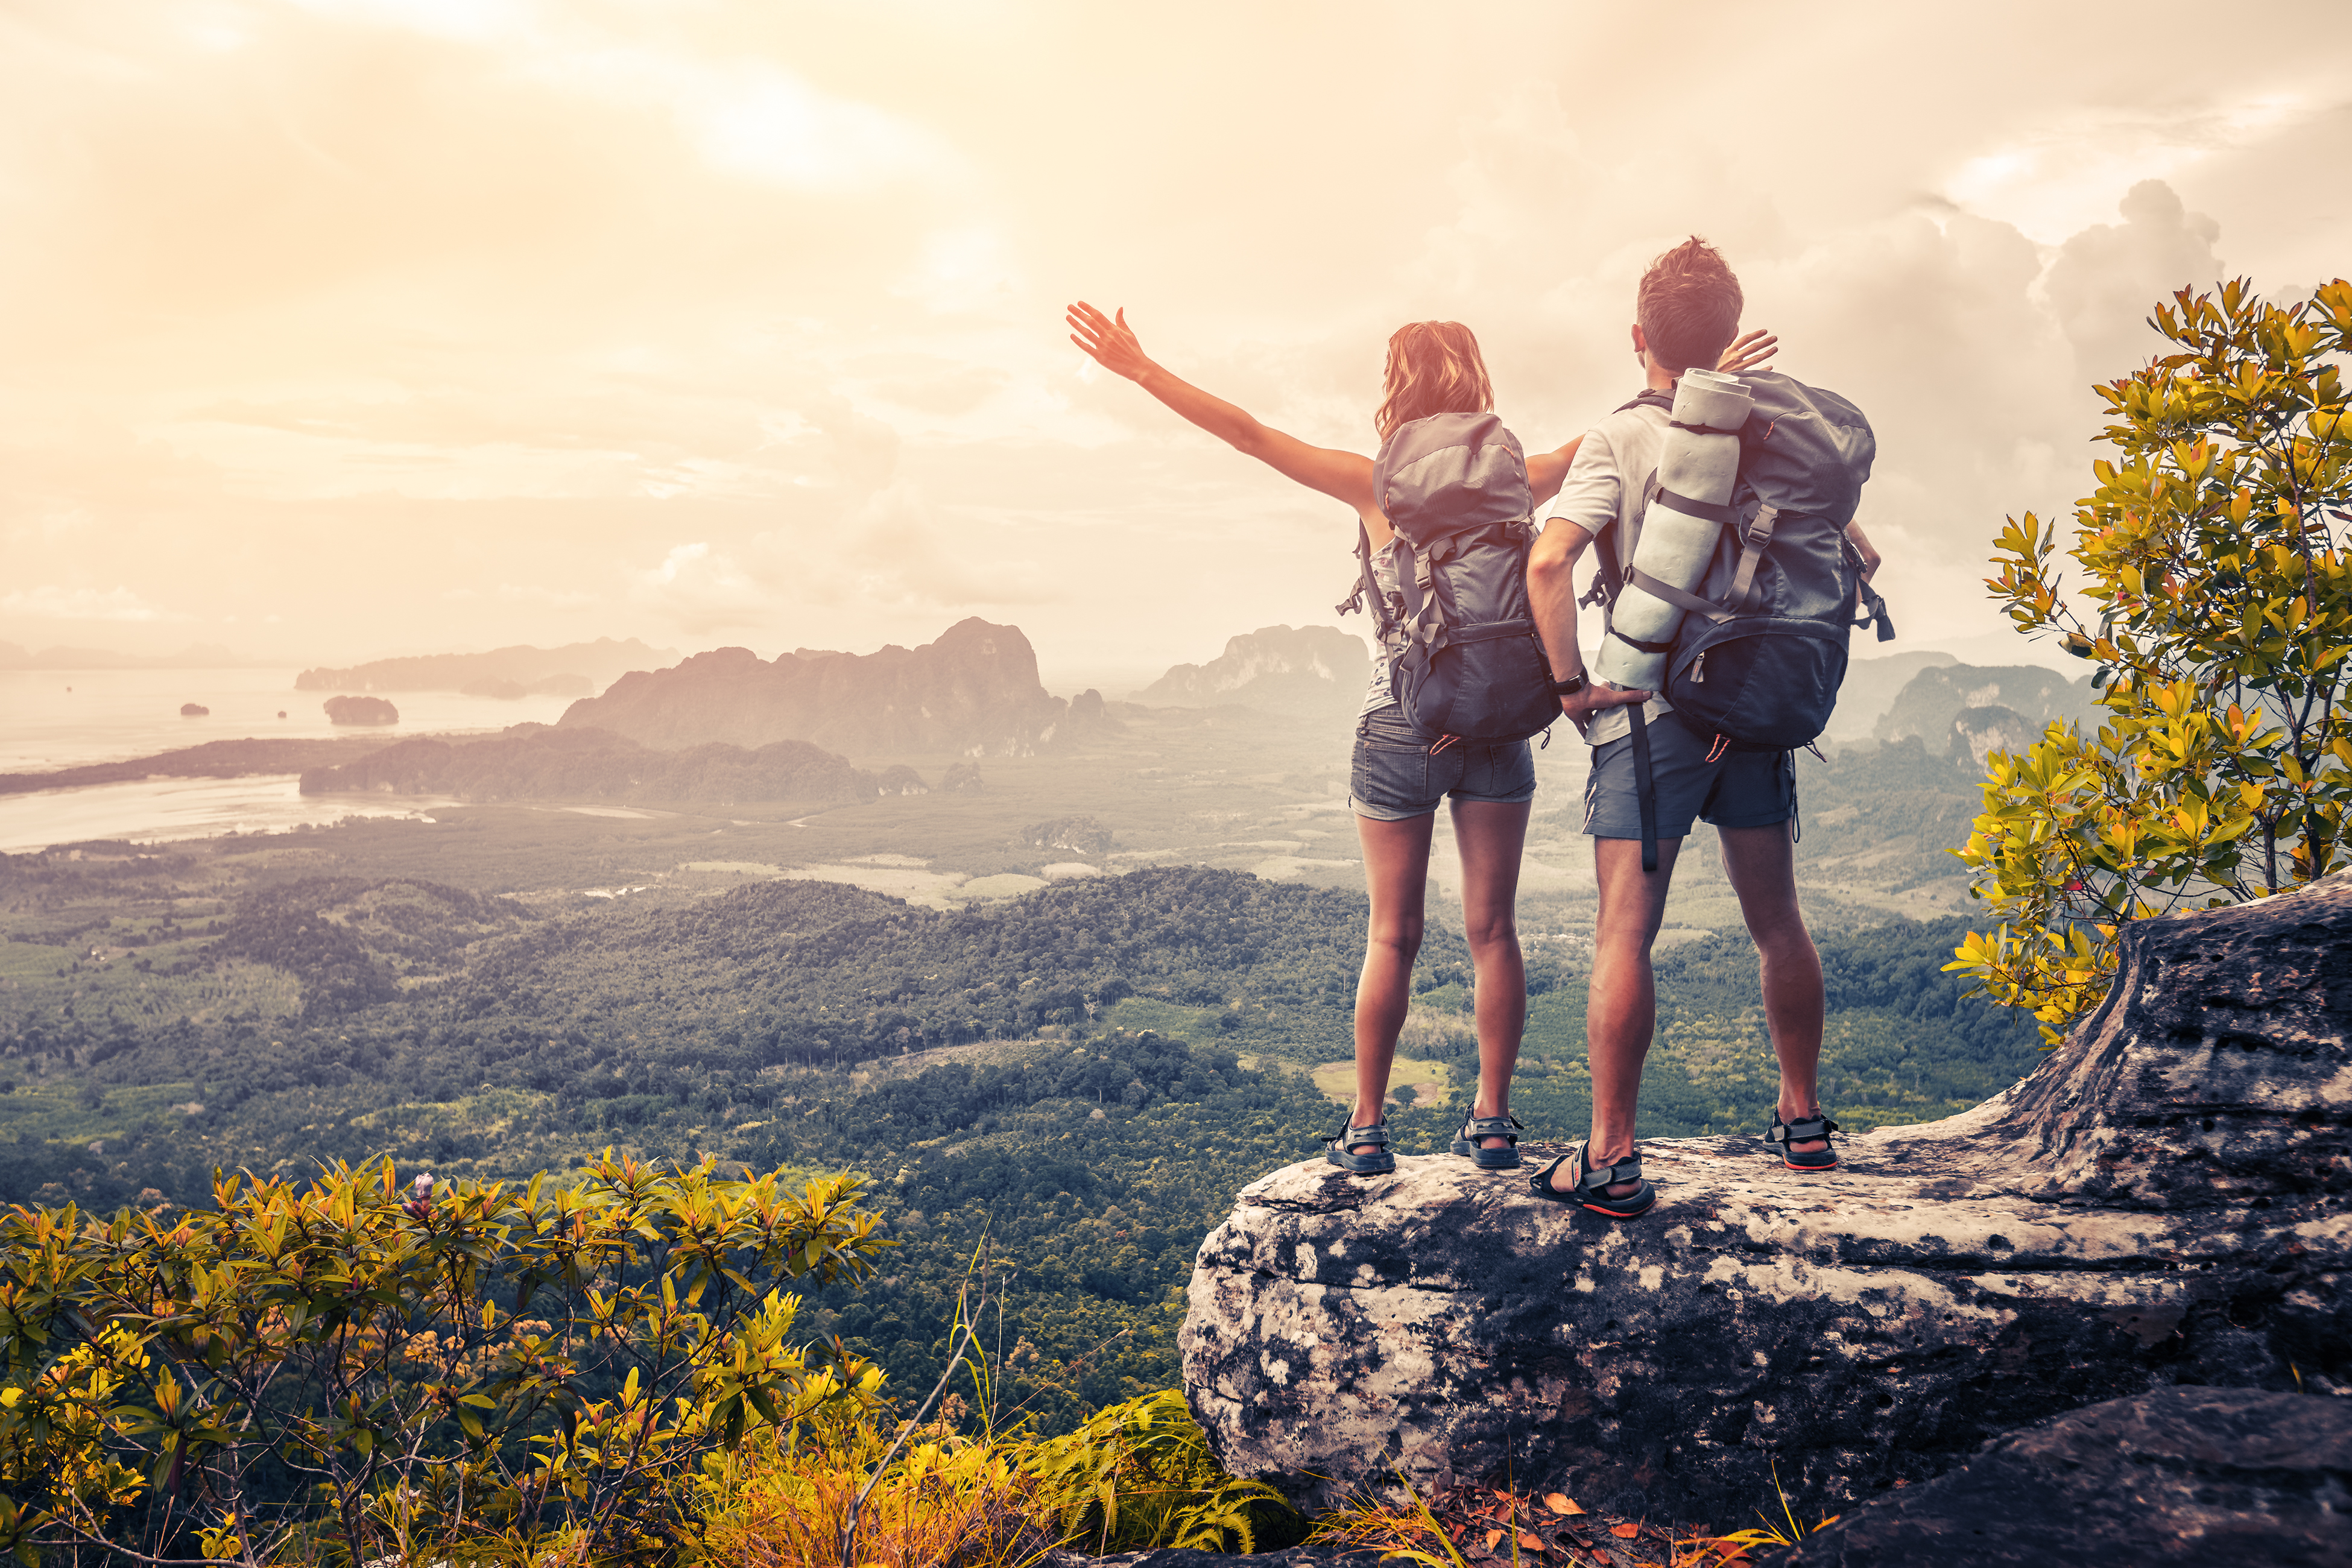 A couple enjoying a view while traveling together | Source: Shutterstock